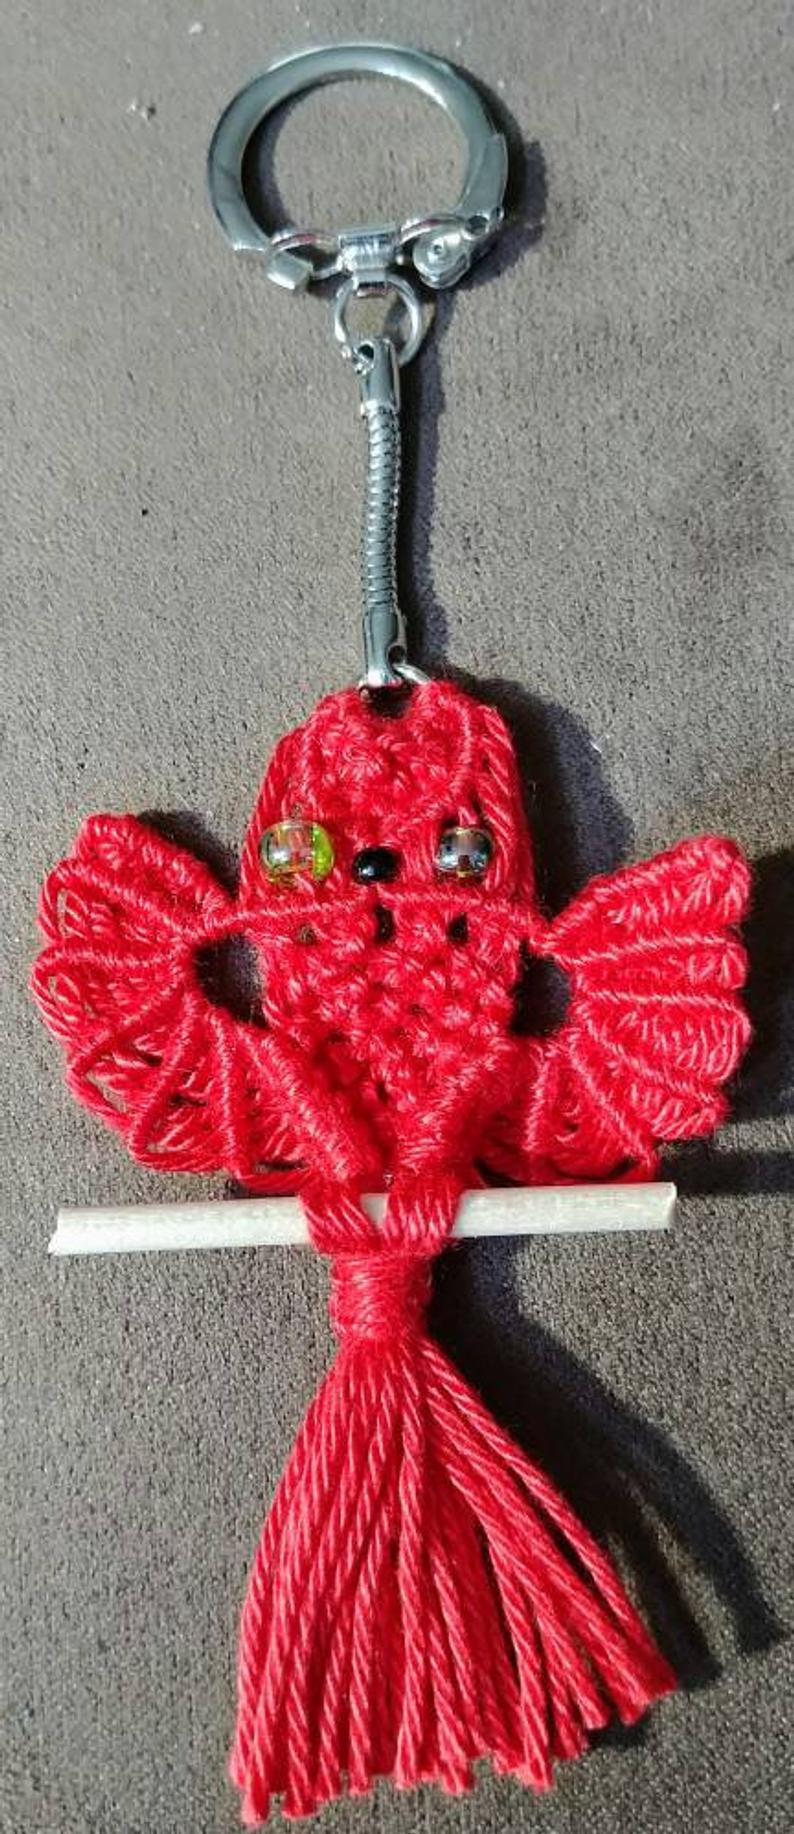 Origami Owl Free Shipping Origami Owl Keychain Macrame Free Shipping Red Owl